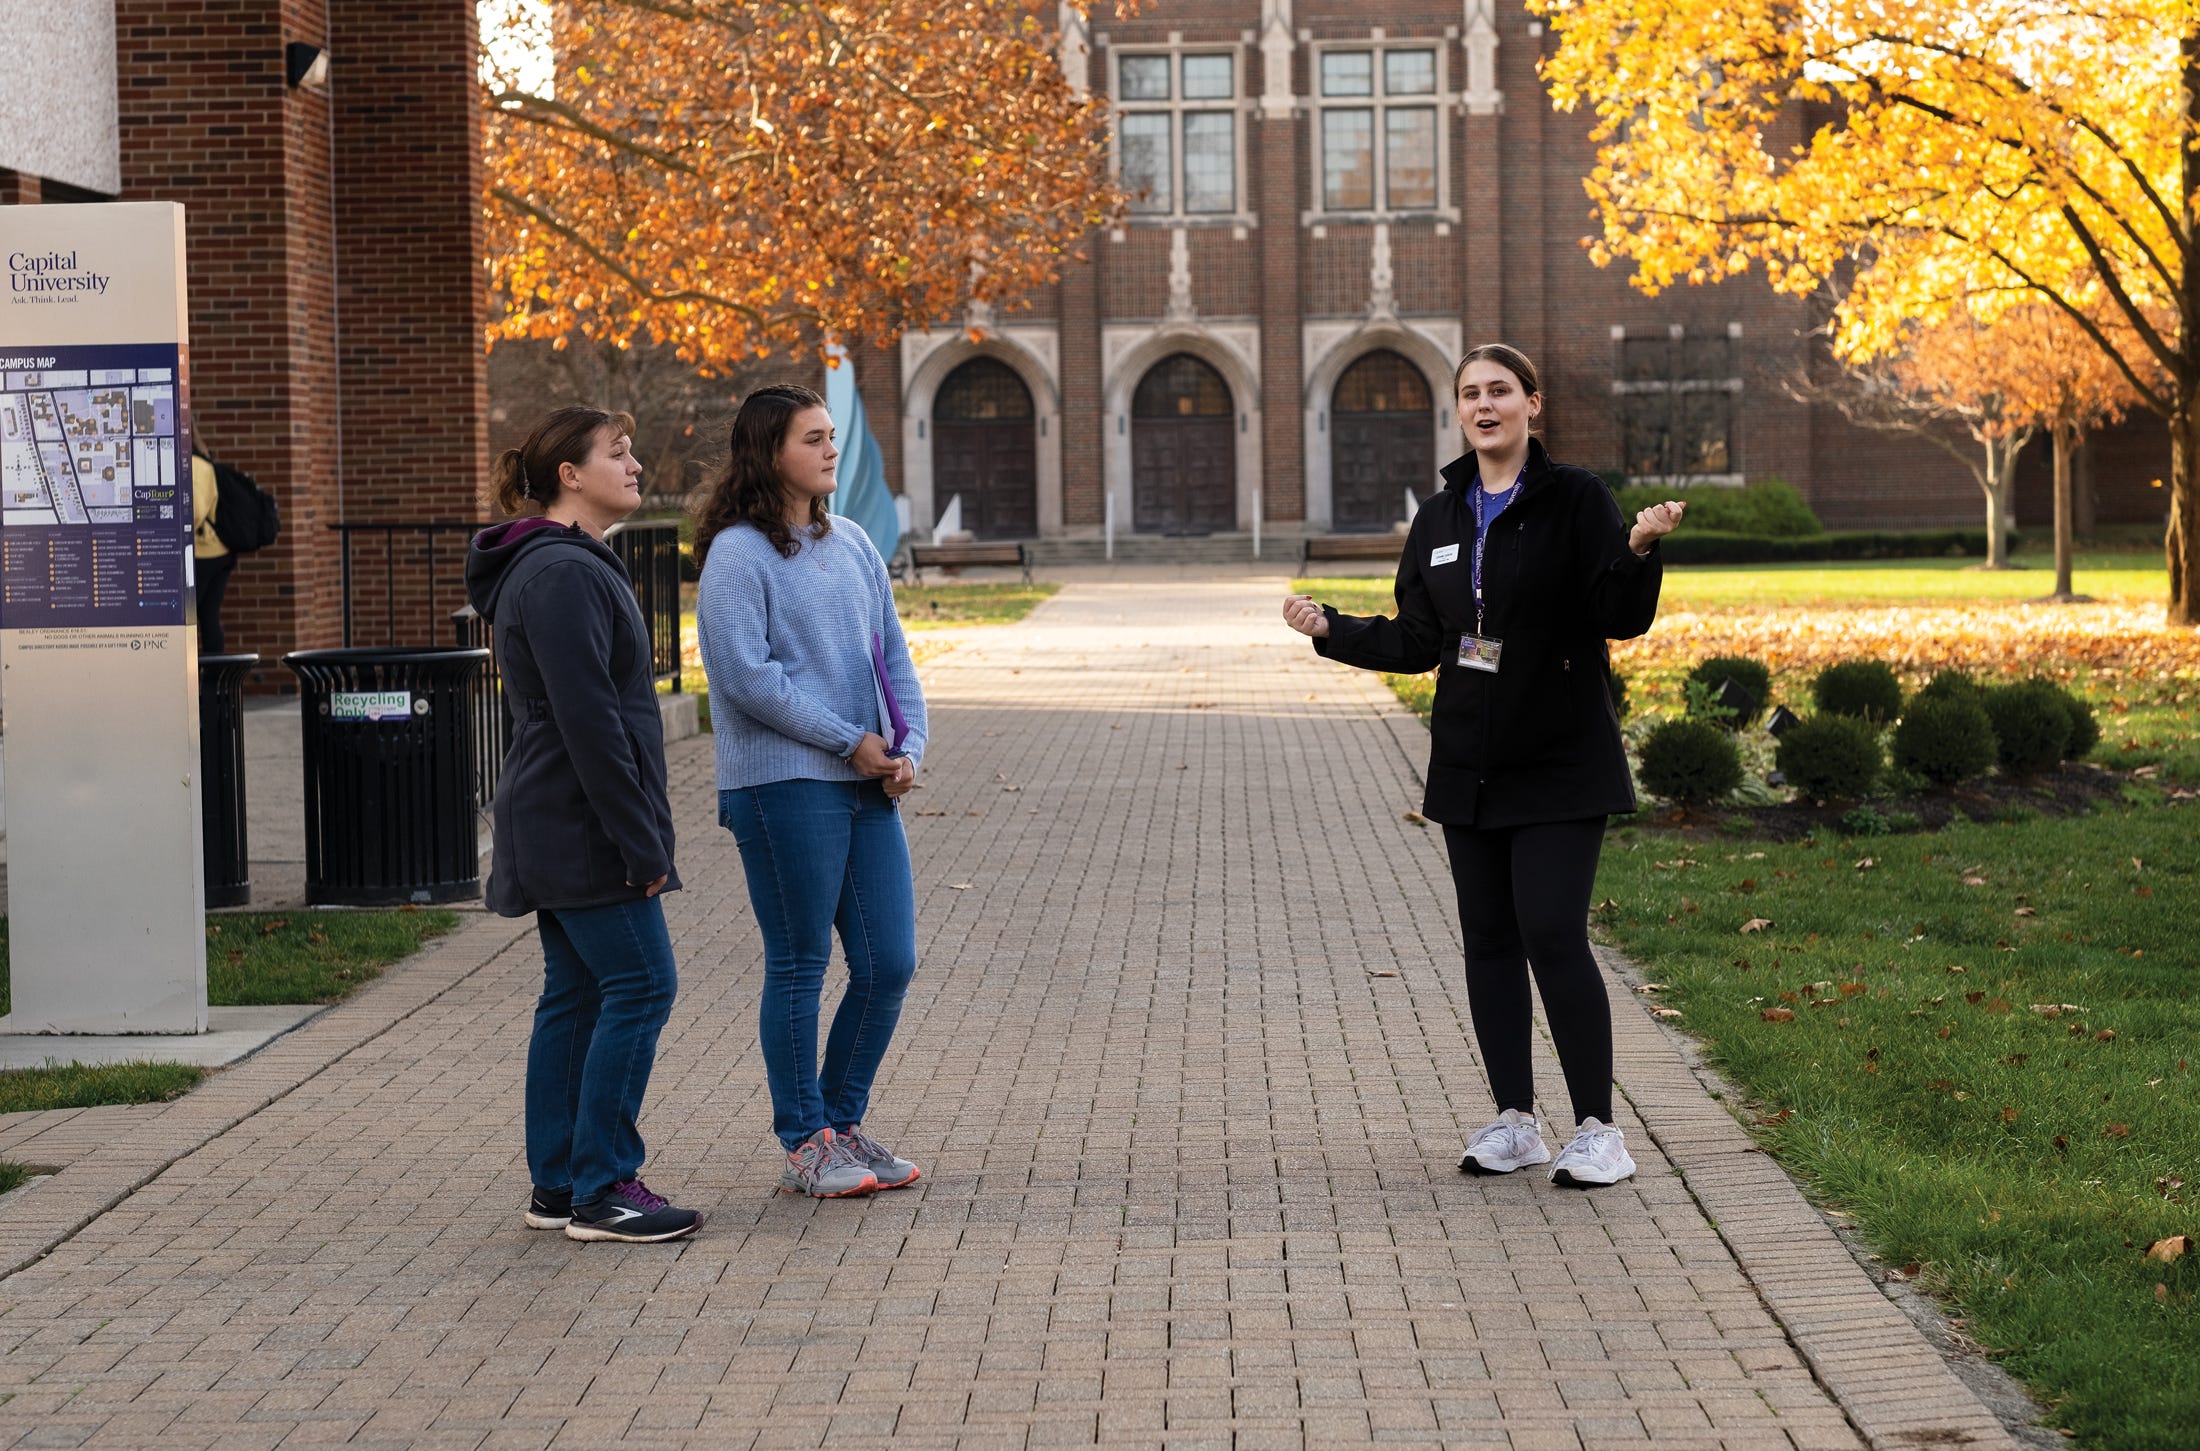 Adeline Thorn and her mother, Melissa Thorn, of Smithville, Ohio, explore Capital University with student tour guide Corinne Gorgas.